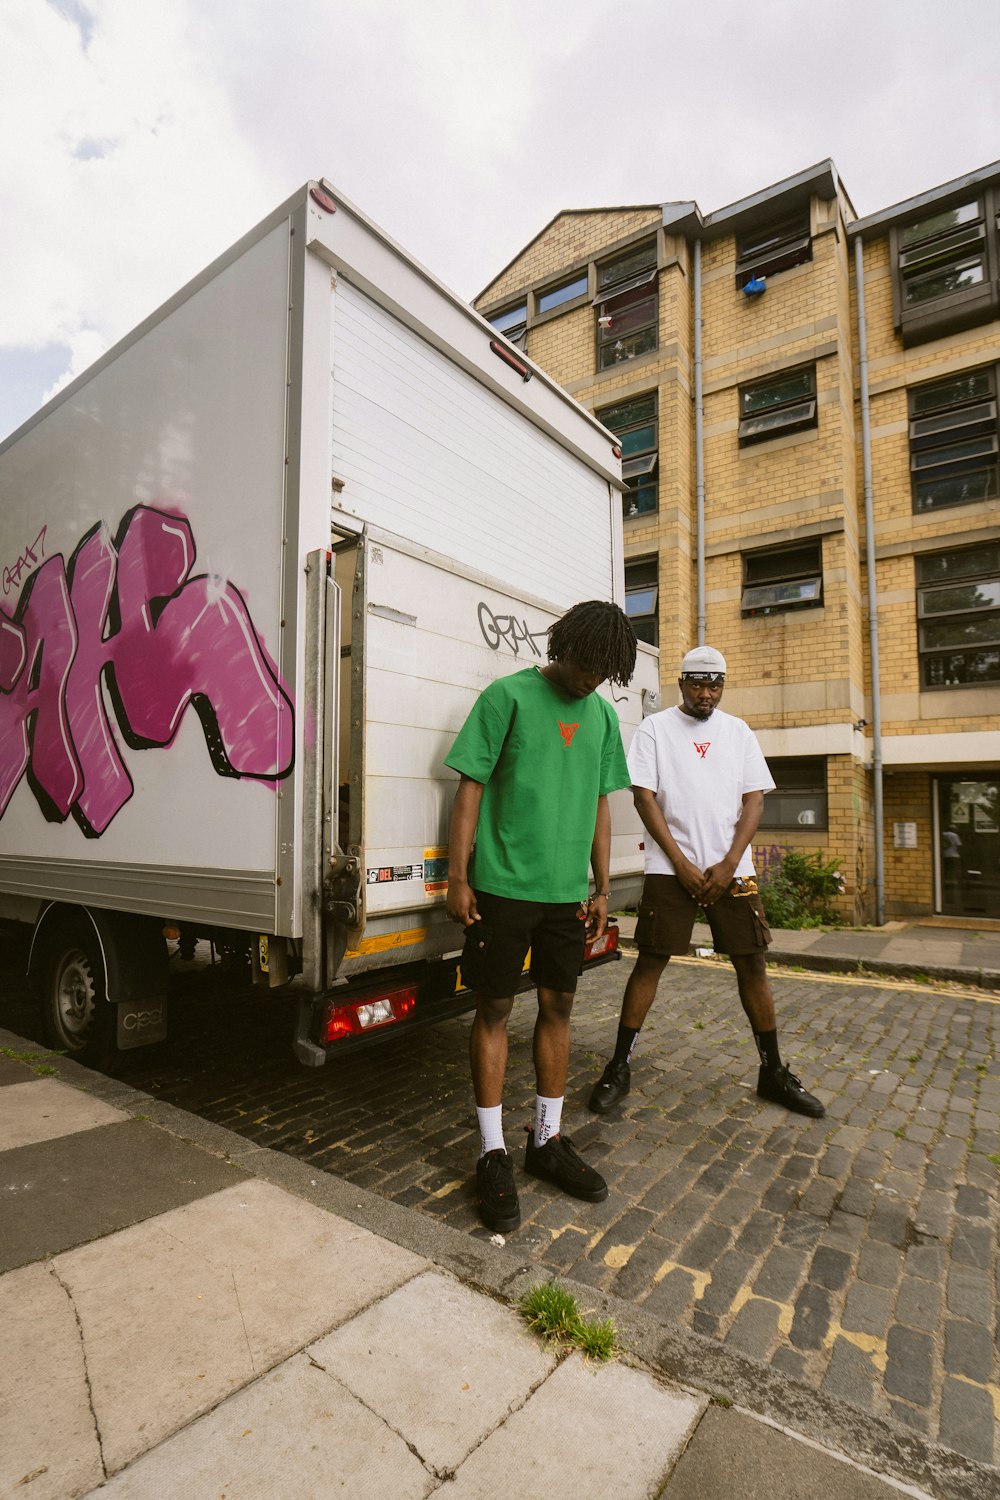 two men standing next to a truck with graffiti on it